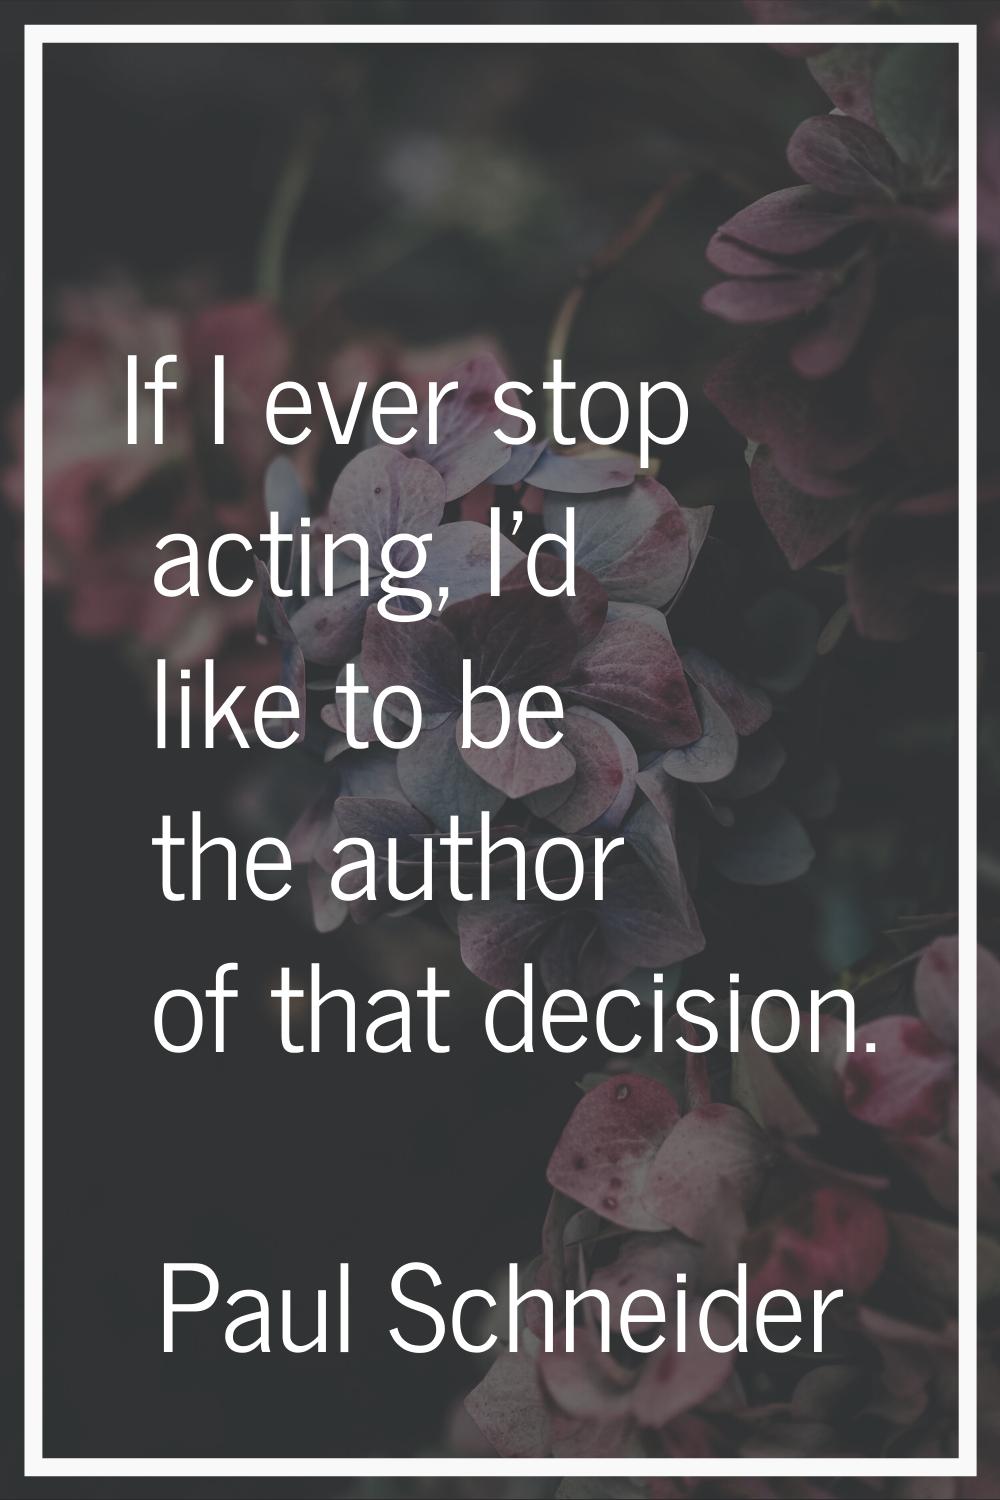 If I ever stop acting, I'd like to be the author of that decision.